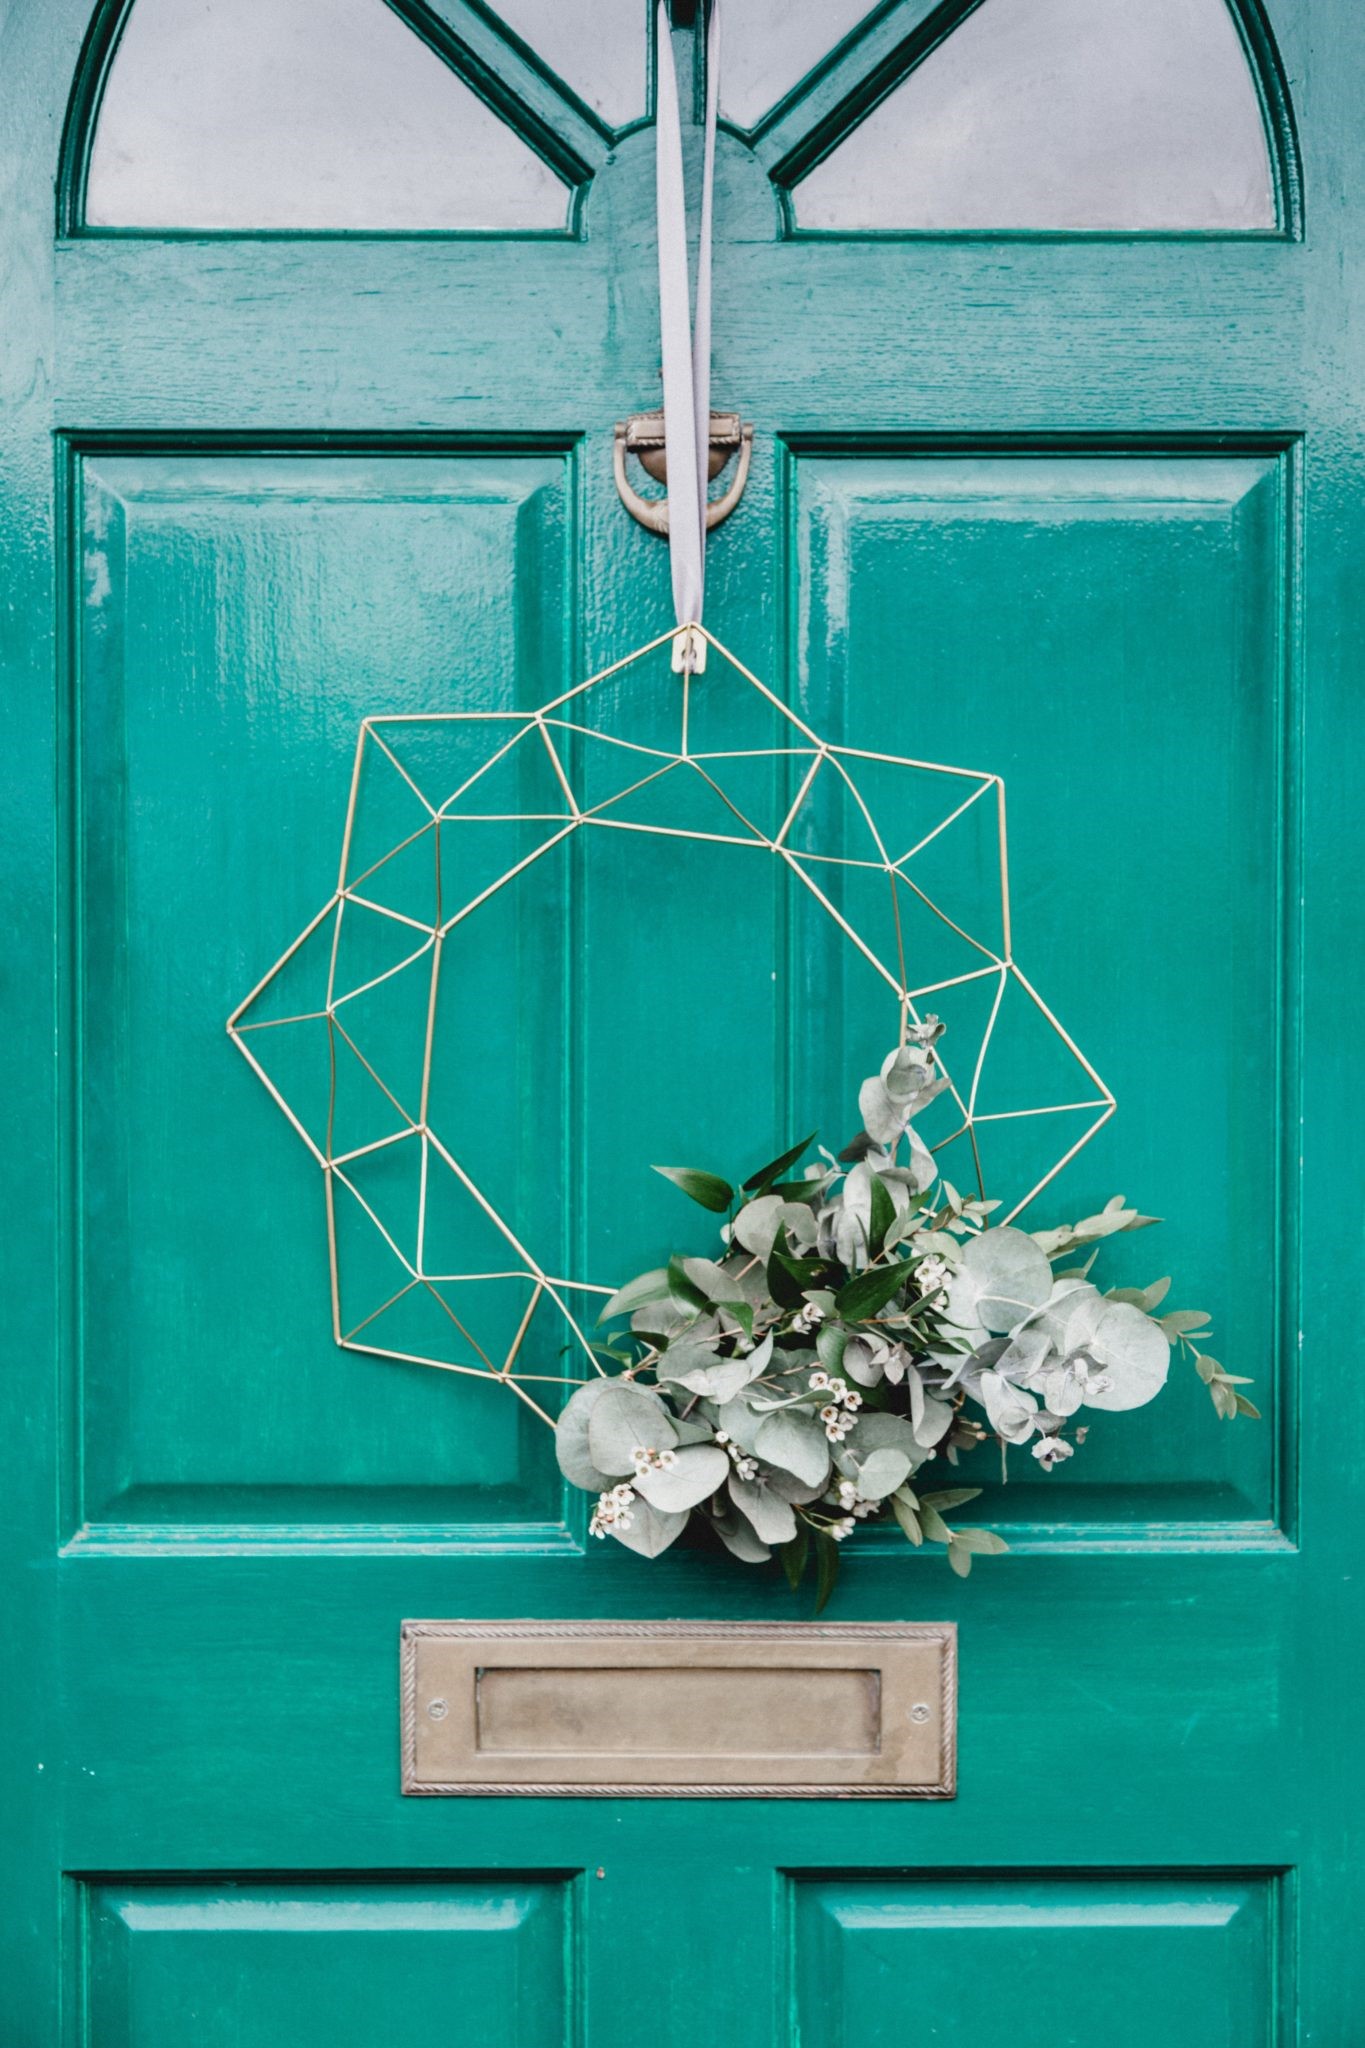 Restore your home with front door home decor